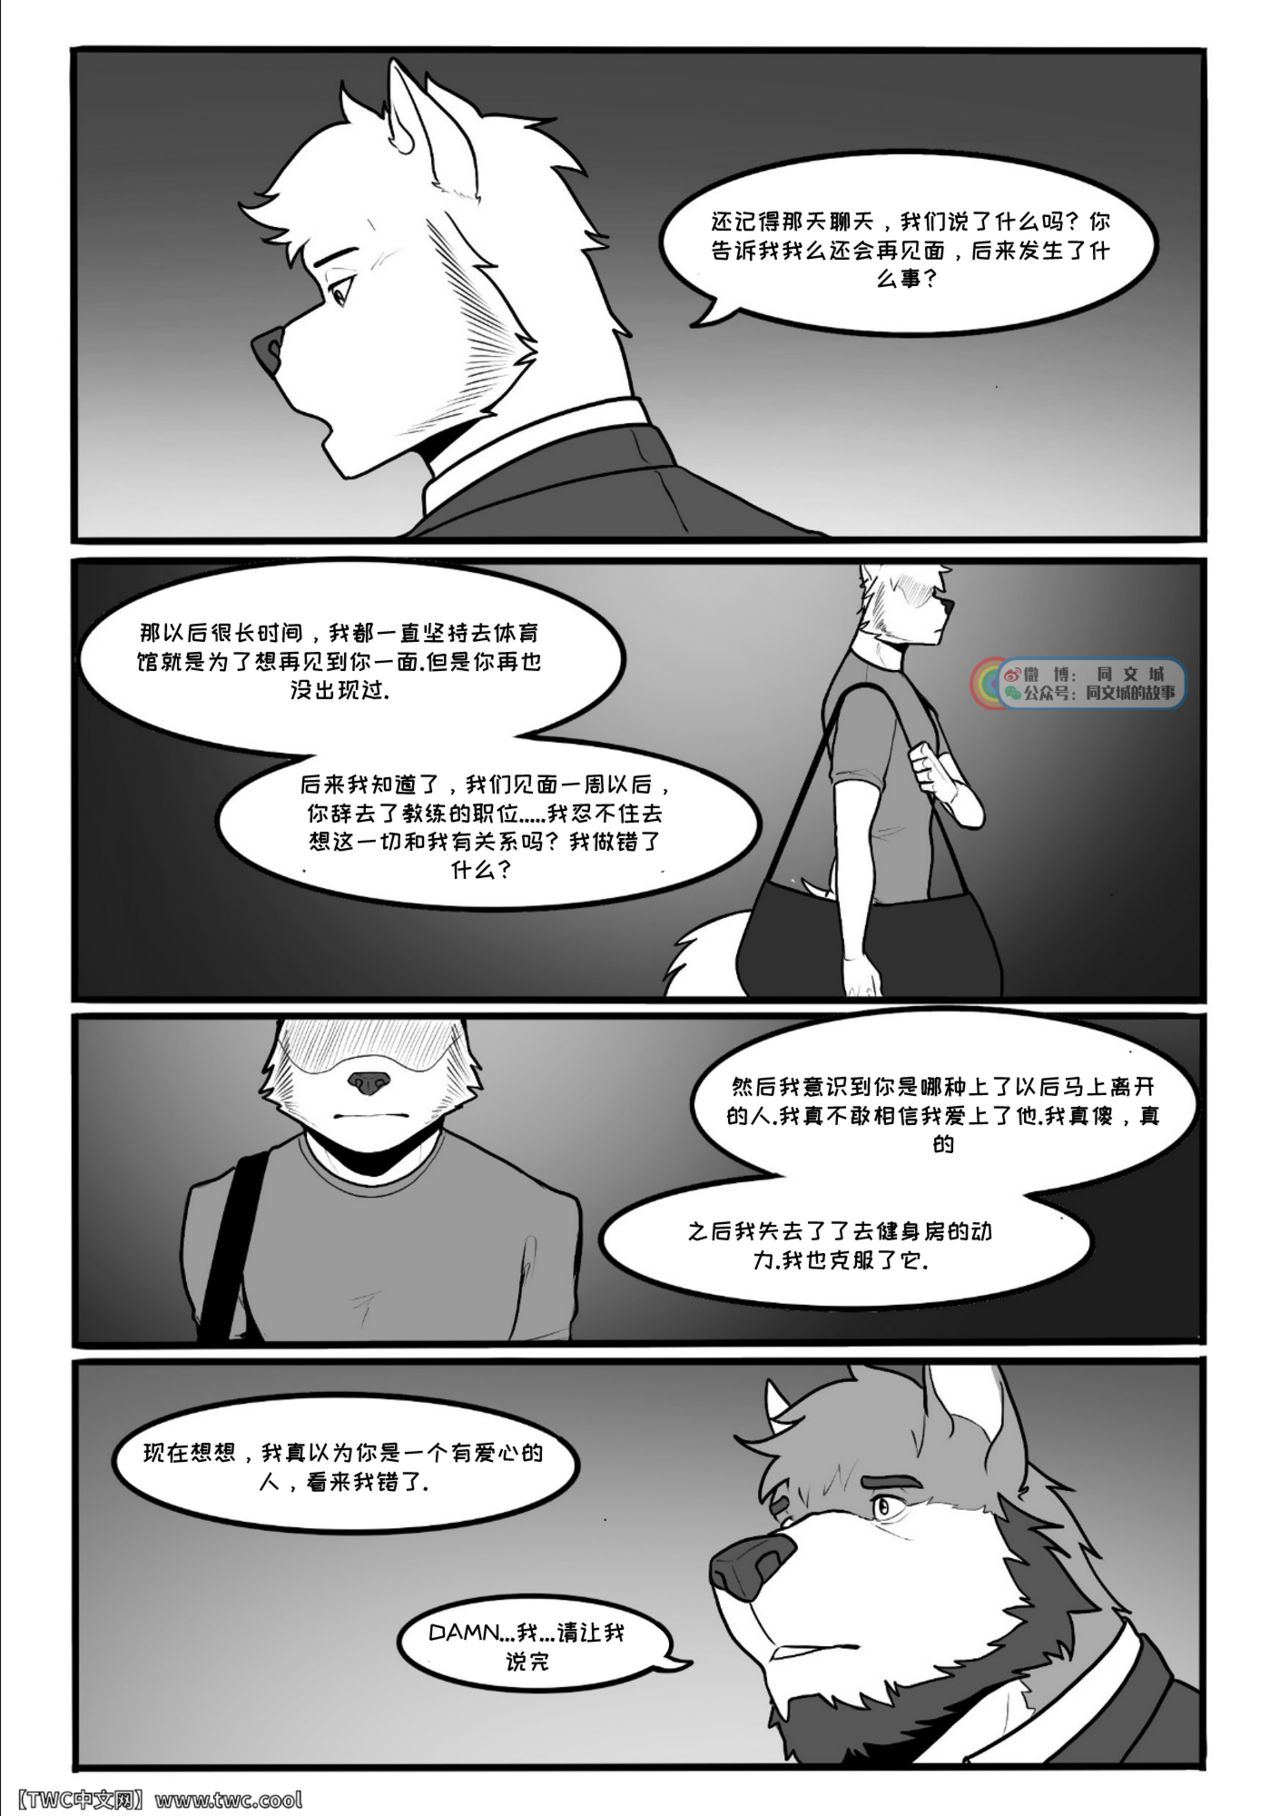 [PurpleDragonRei] Our Differences Ch.2 [Chinese] [中国翻訳] [同文城] [PurpleDragonRei] Our Differences Ch.2 [Chinese] [中国翻訳] [同文城]